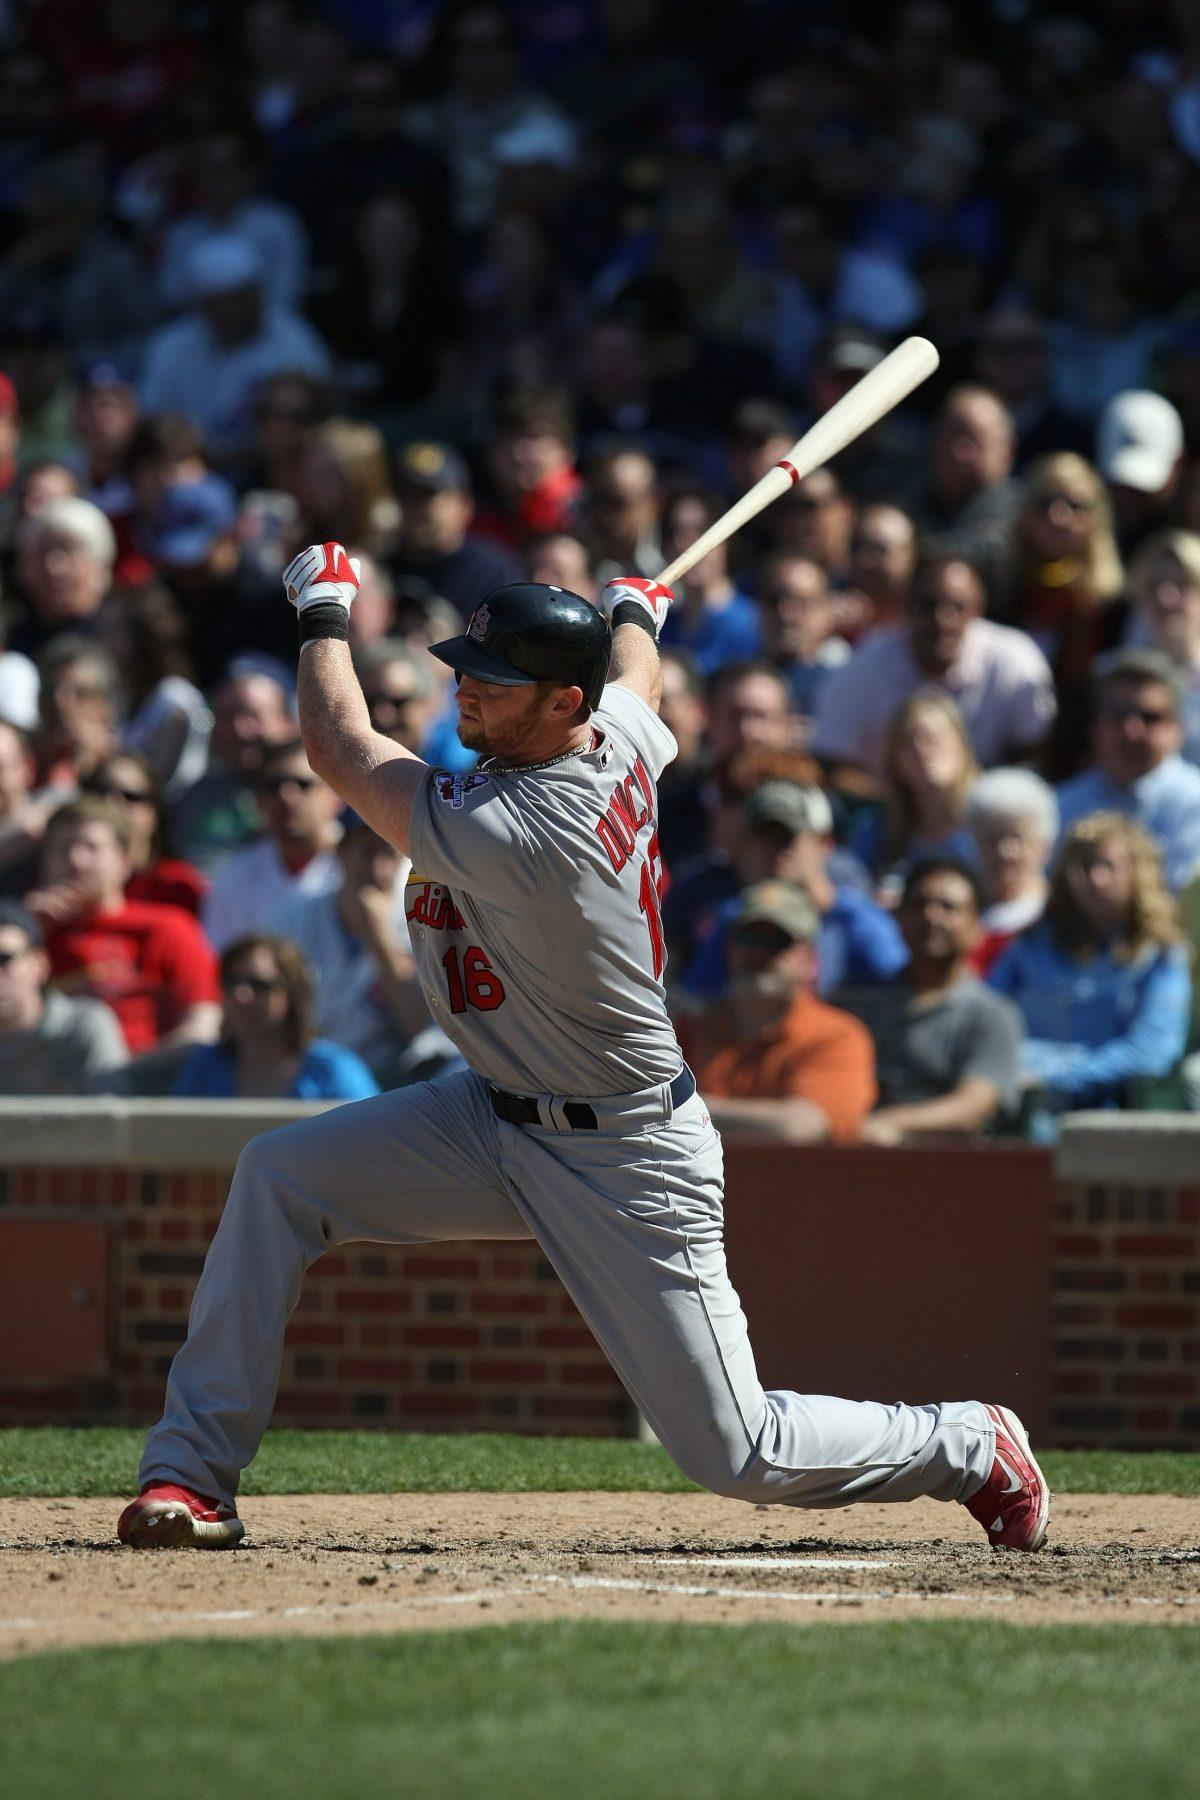 Chris Duncan #16 of the St. Louis Cardinals bats against the Chicago Cubs at Wrigley Field in Chicago, Illinois, on April 17, 2009. (Jonathan Daniel/Getty Images)